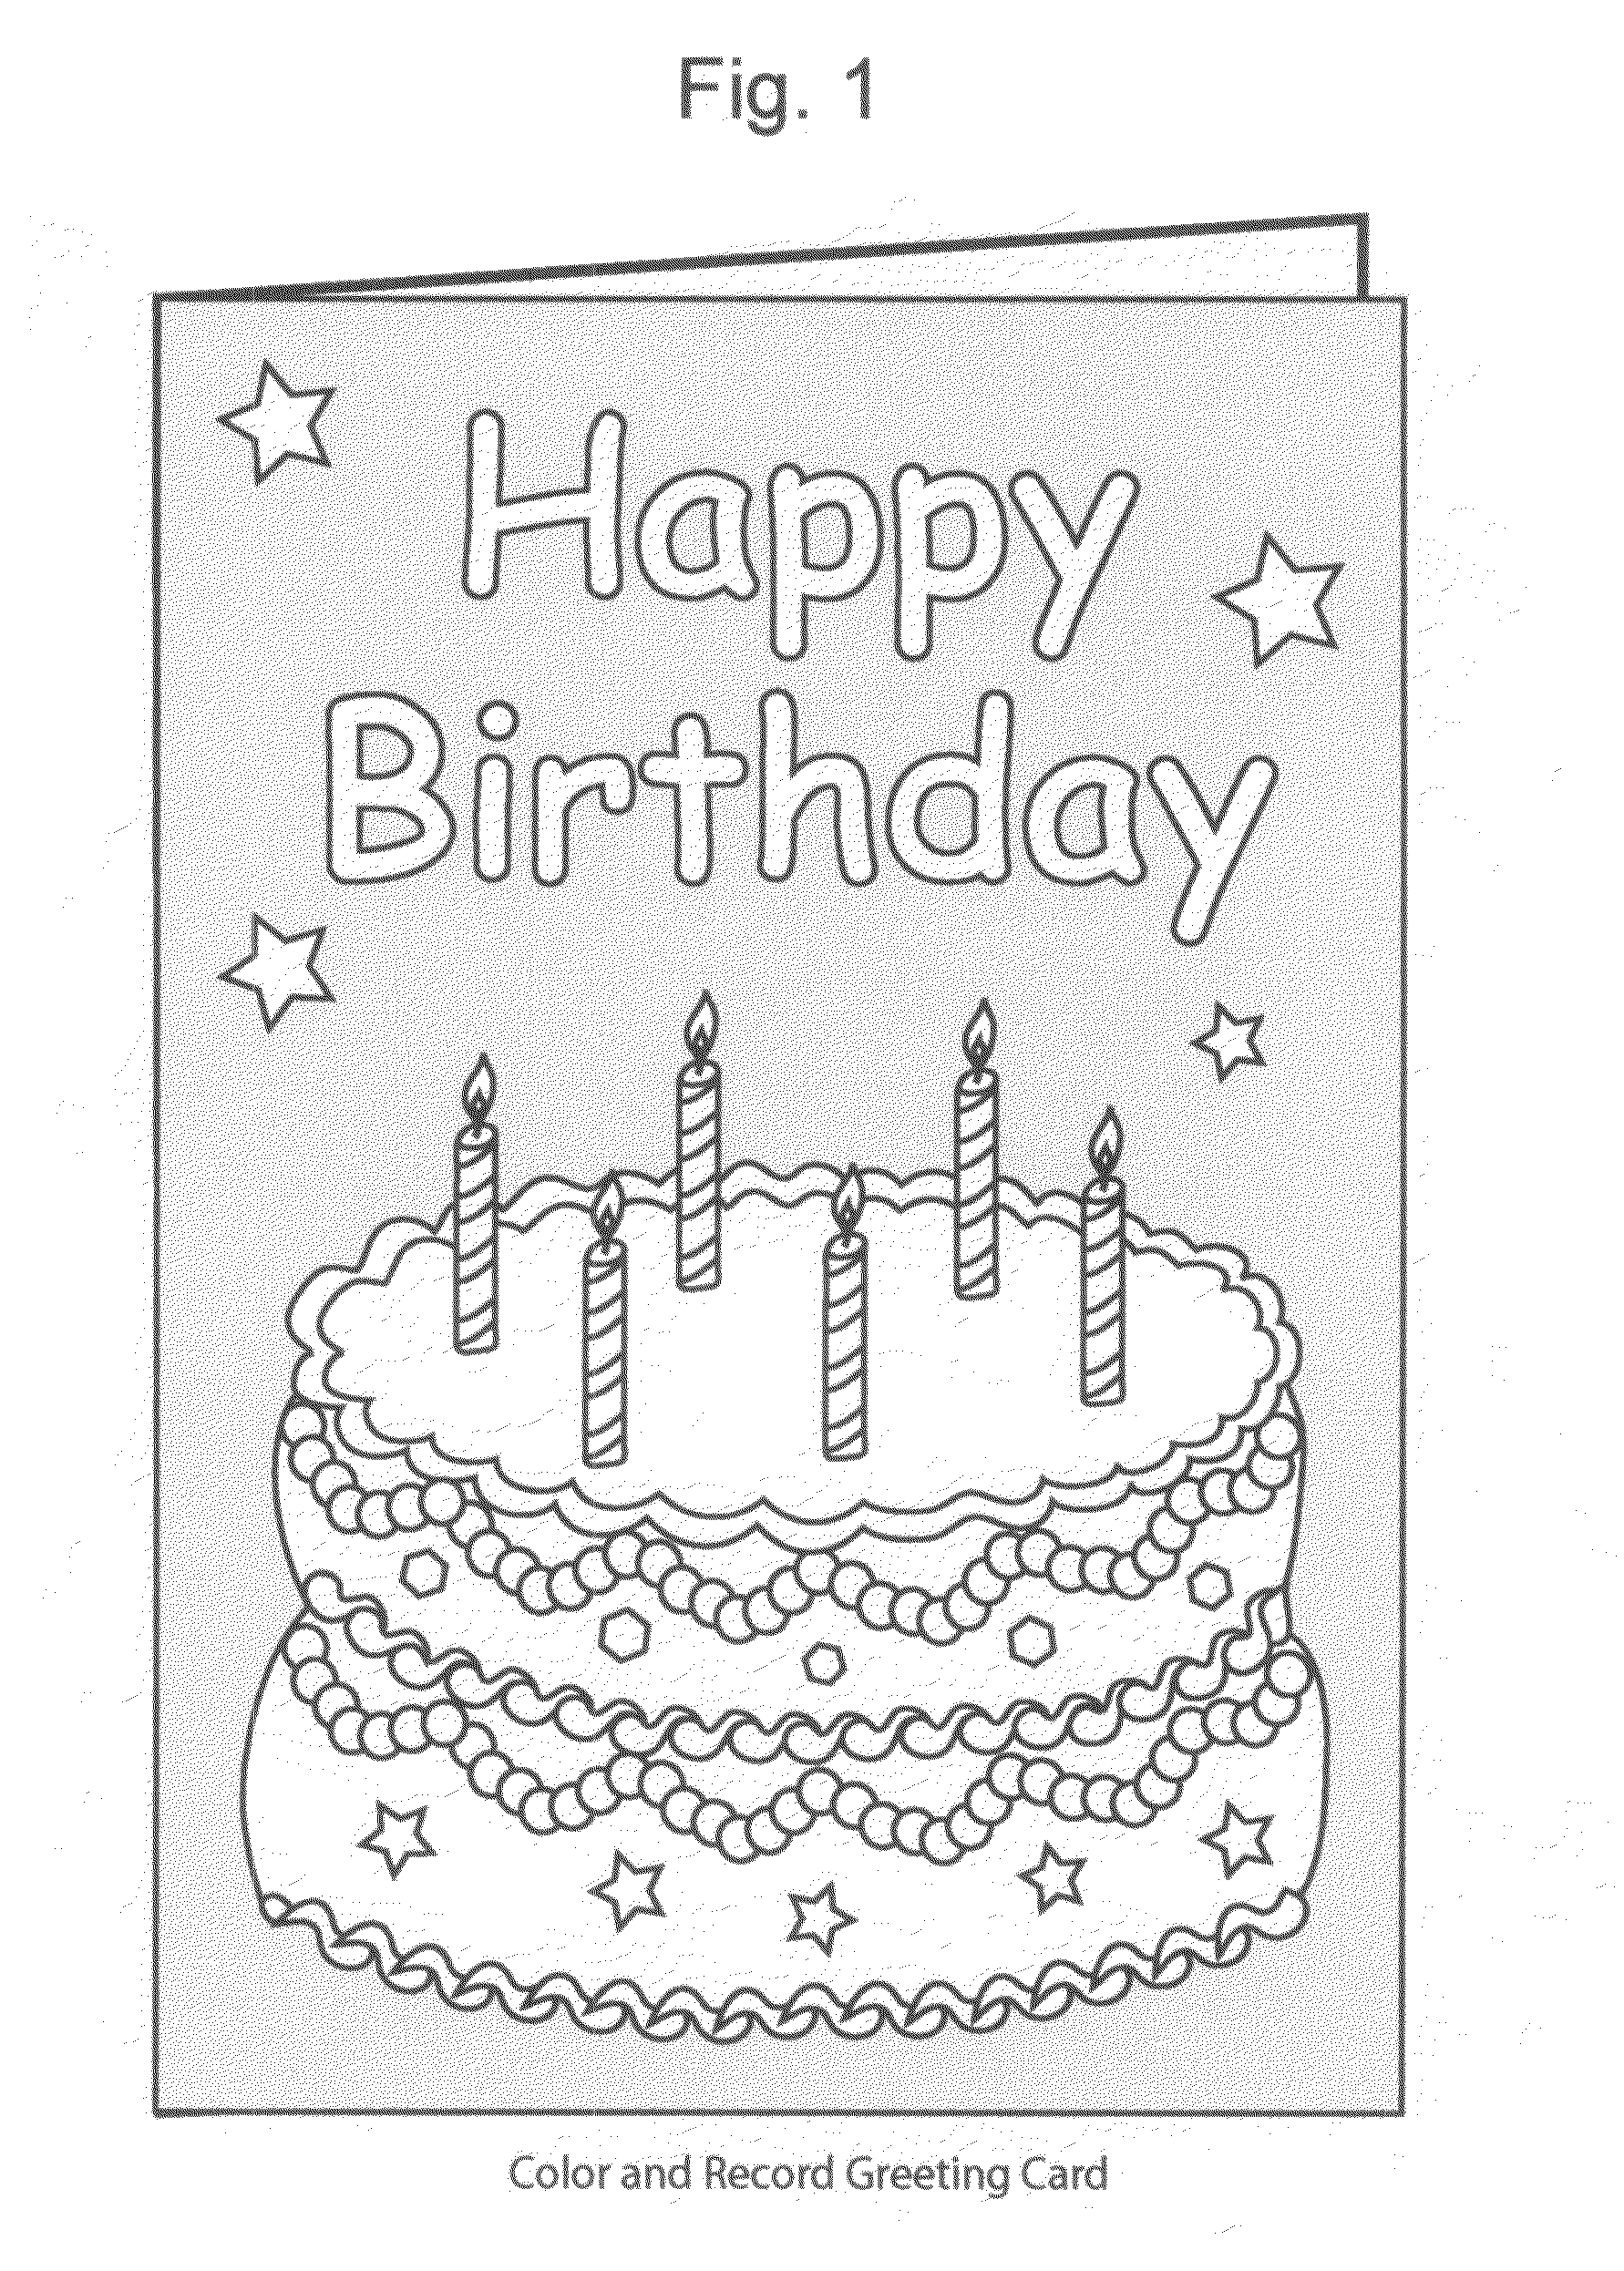 Greeting card that is colored or decorated and has a recording and playback device built into the card